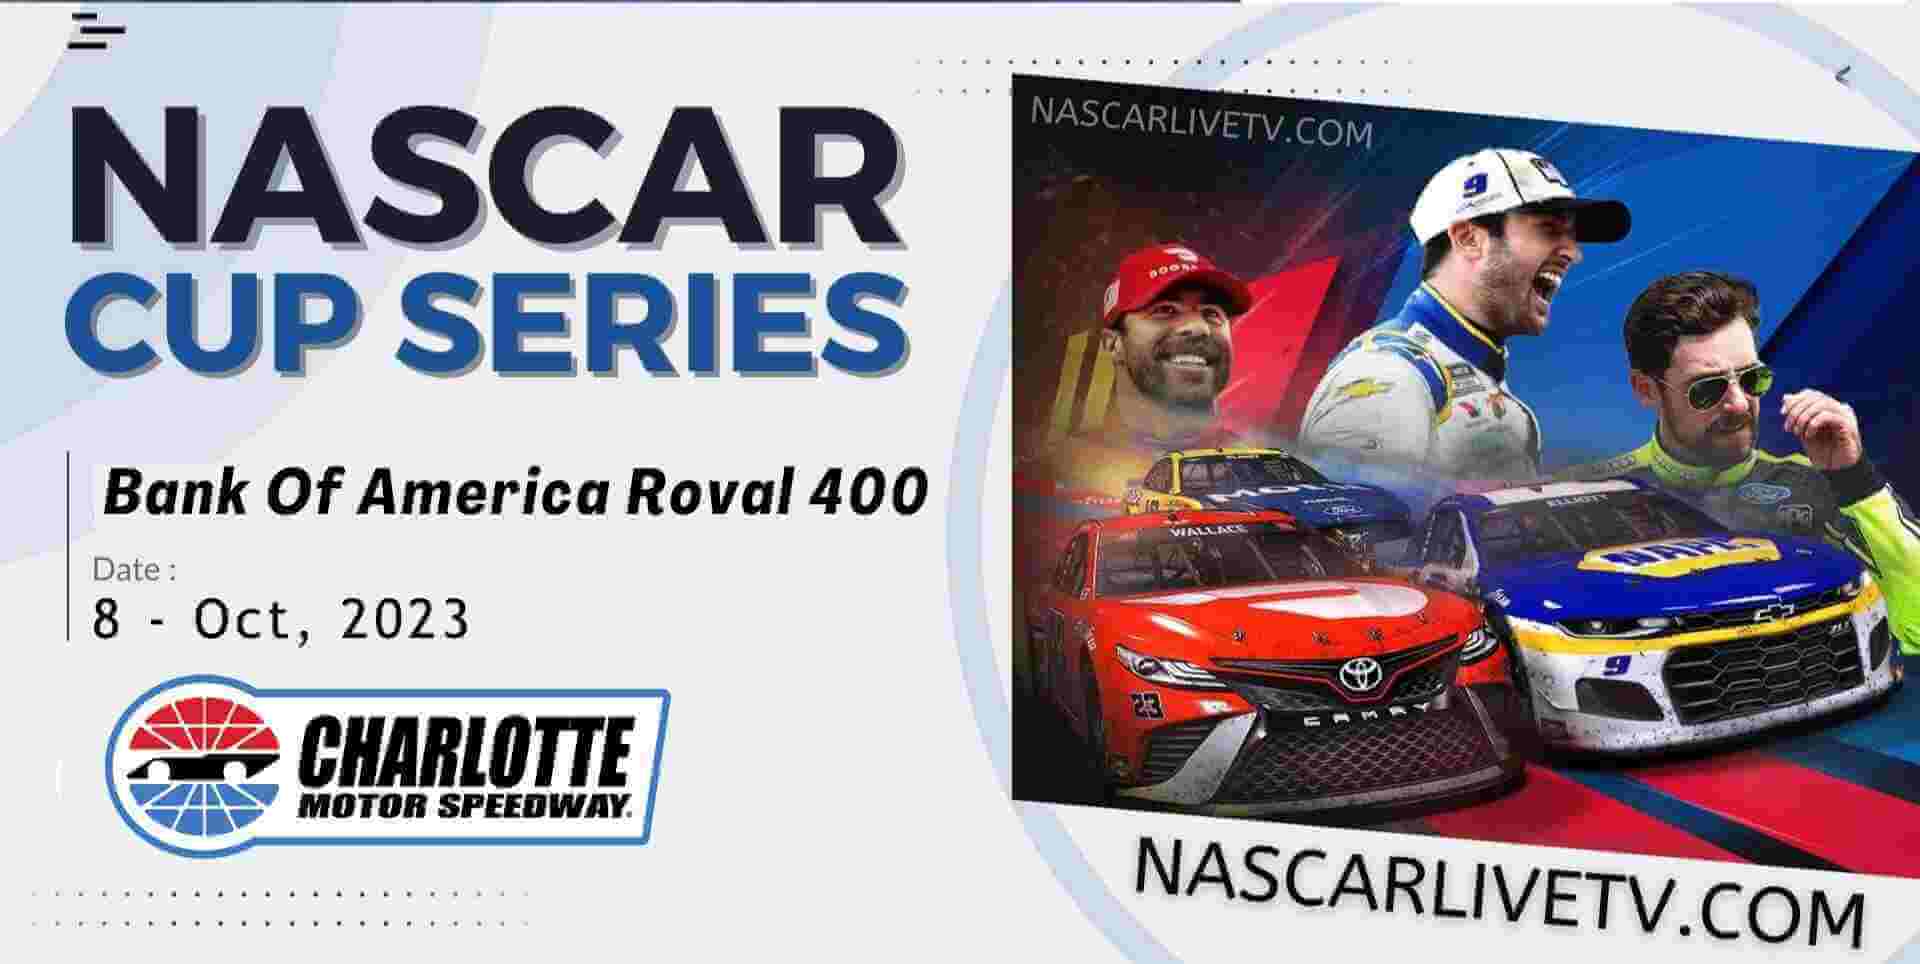 Nascar Online 2023 NASCAR Live Stream, Highlights, Schedule and Results